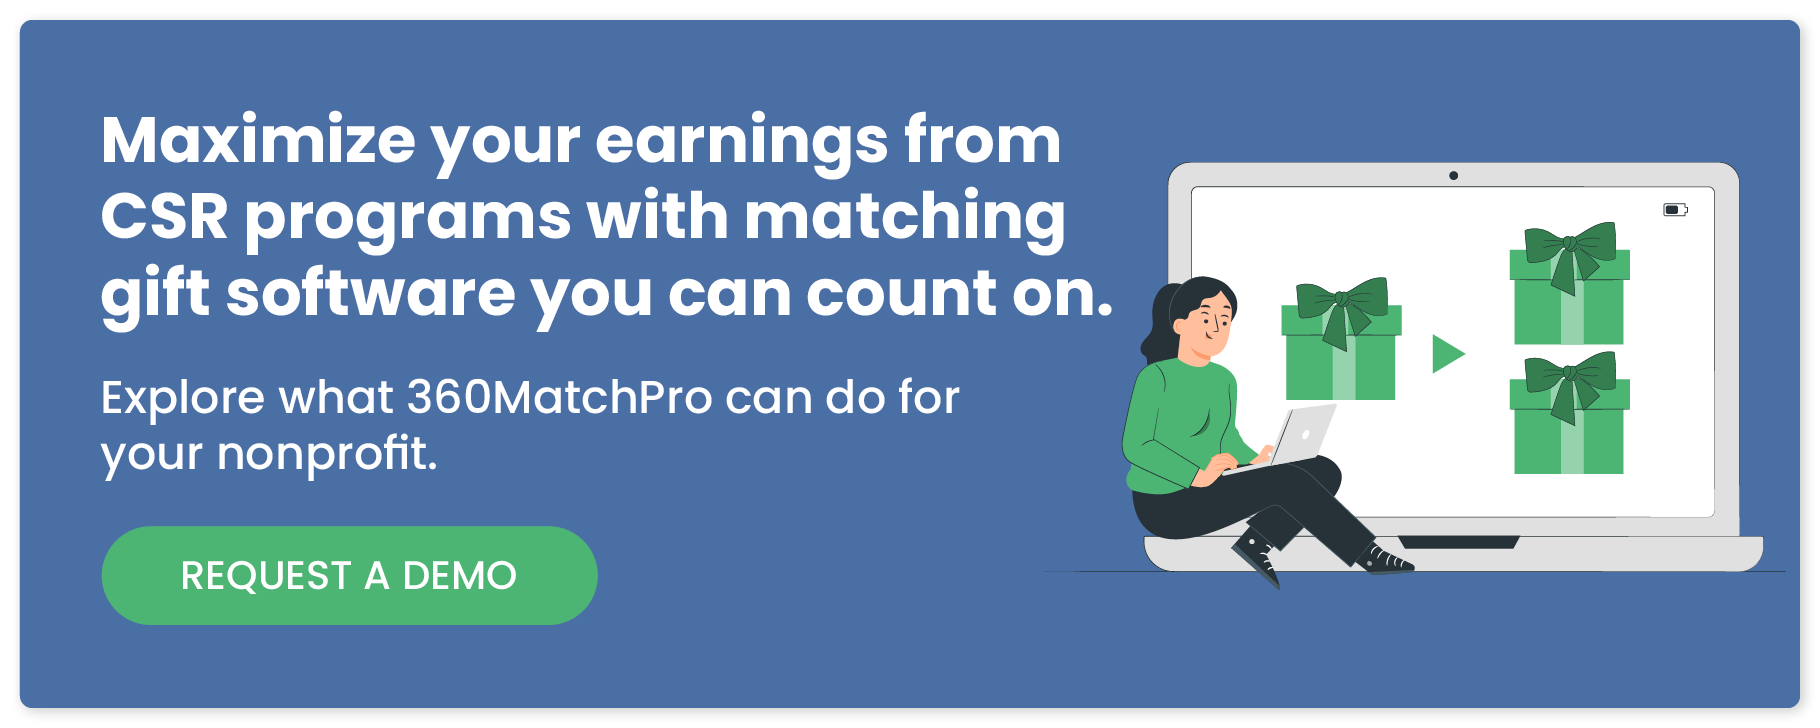 Maximize your earnings from CSR programs with matching gift software you can count on. Explore what 360MatchPro can do for your nonprofit. Request a demo.